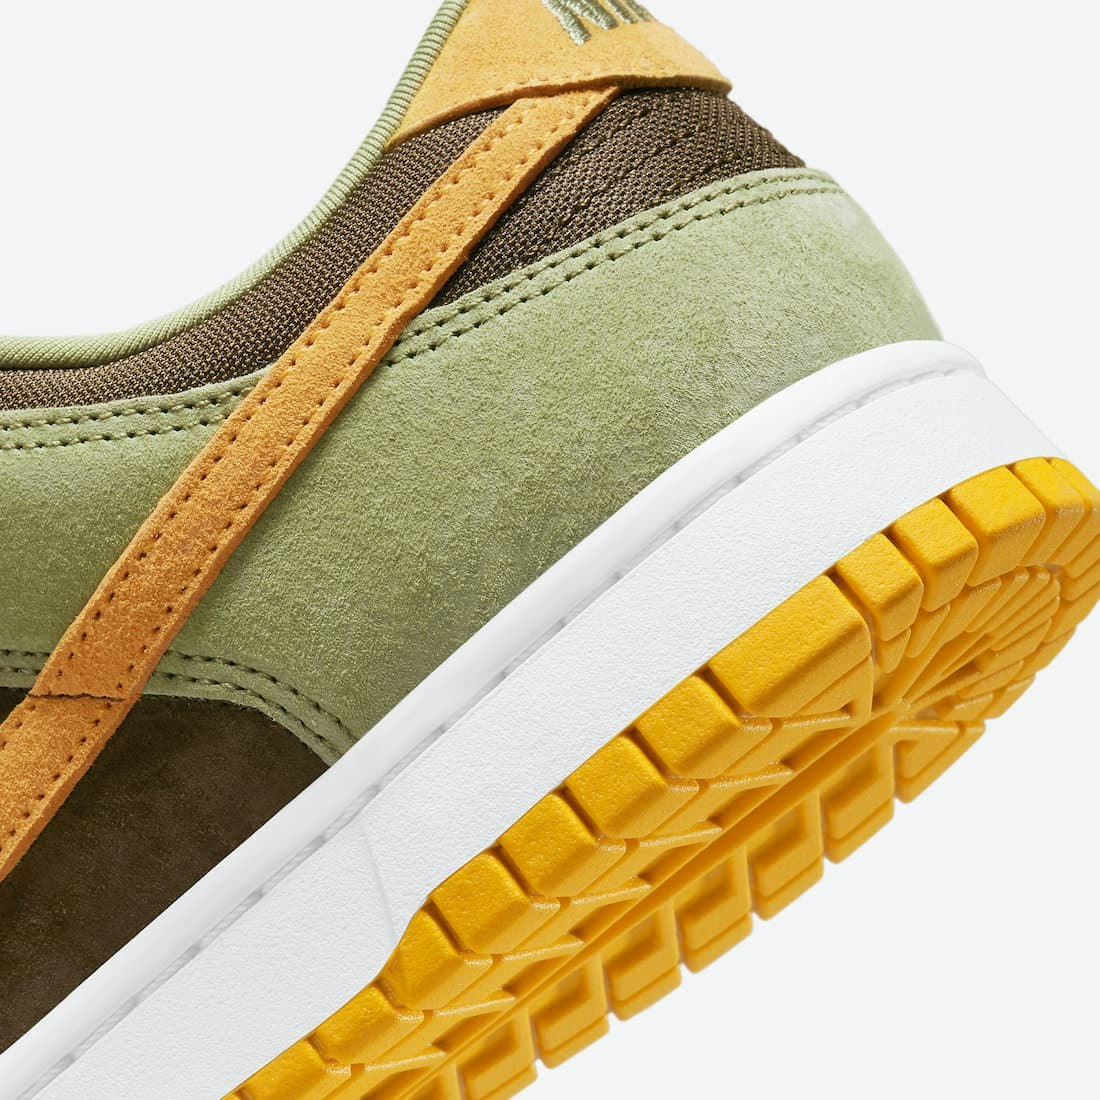 Nike Dunk Low “Dusty Olive”